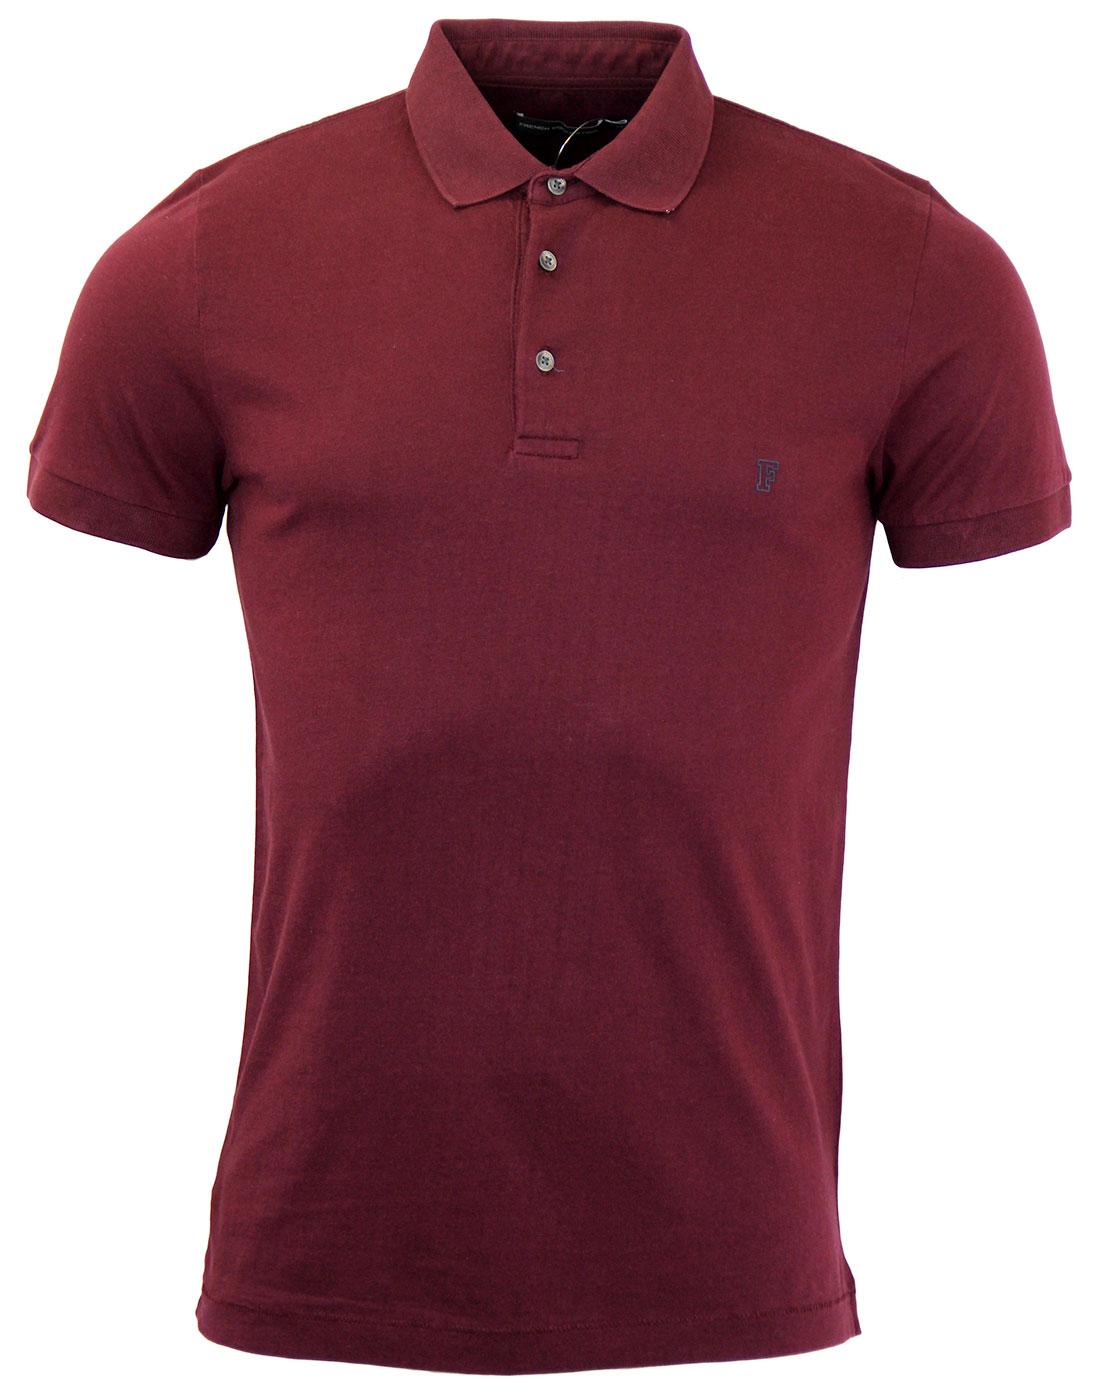 FRENCH CONNECTION Sneezy Retro Mod Jersey Polo Shirt Bordeaux